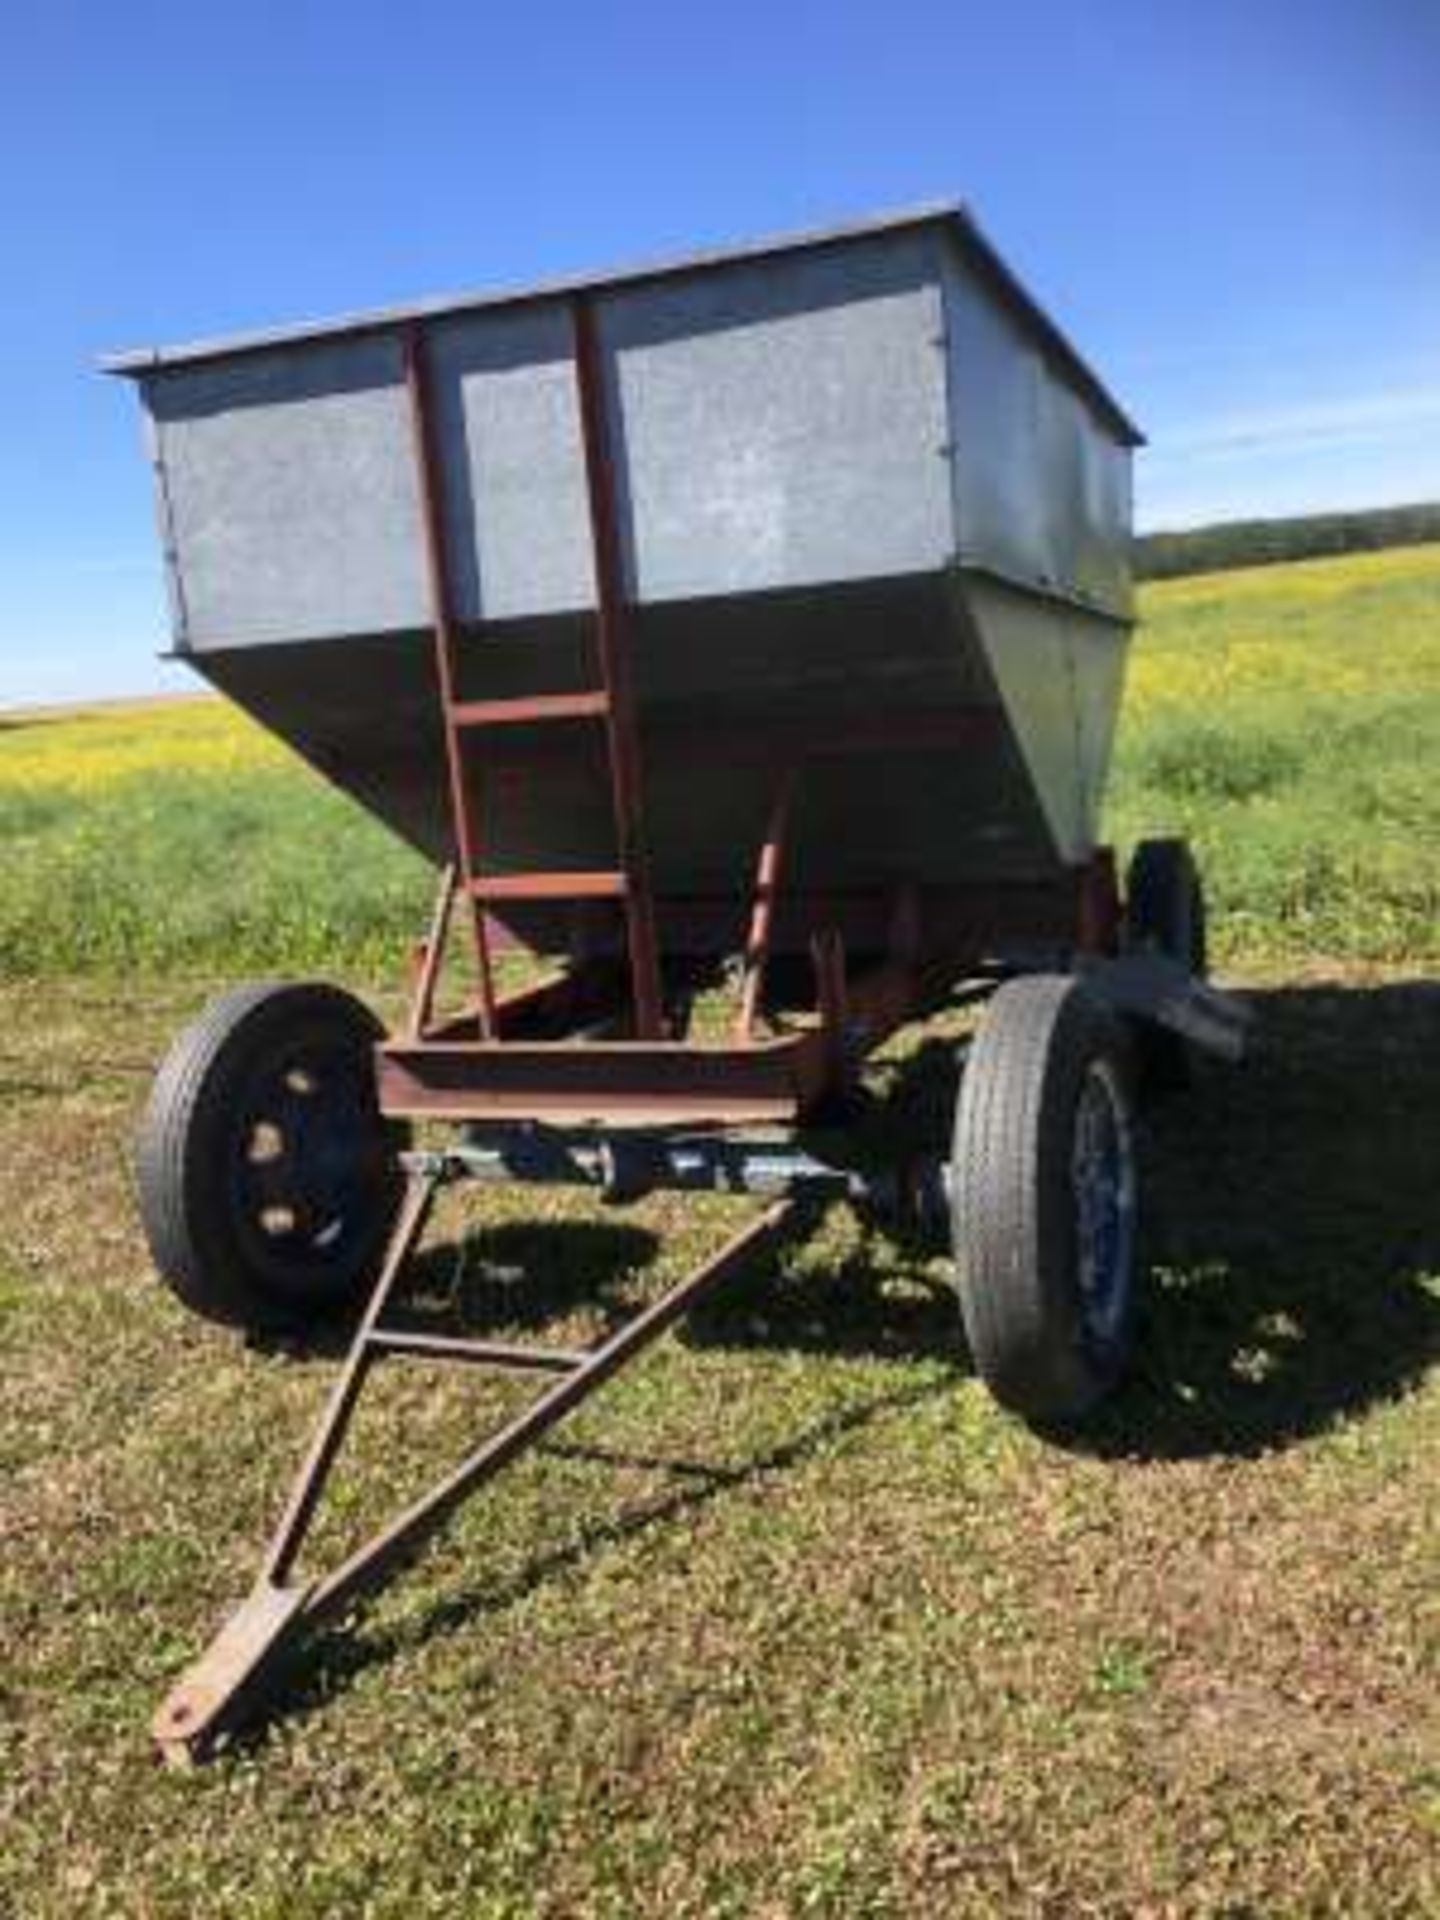 Kendon Hopper wagon on trailer with 750 x 20 tires